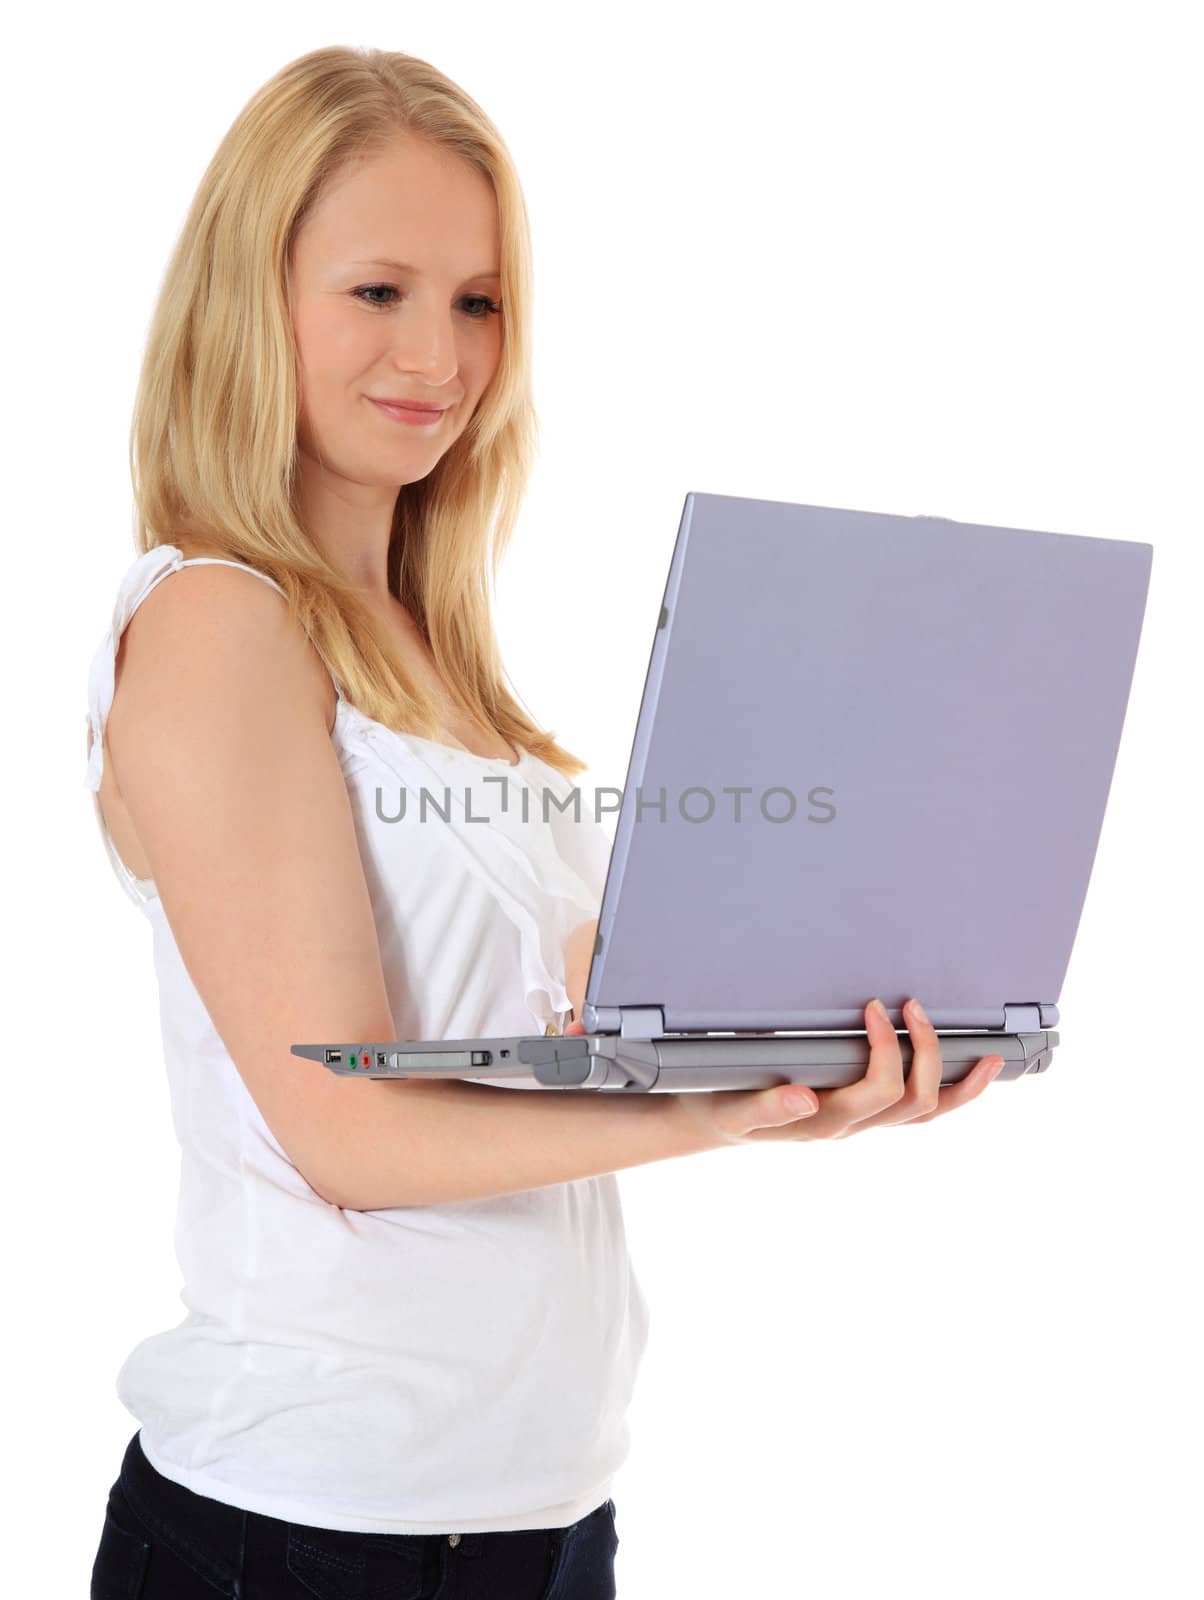 Attractive blond girl using laptop. All on white background.